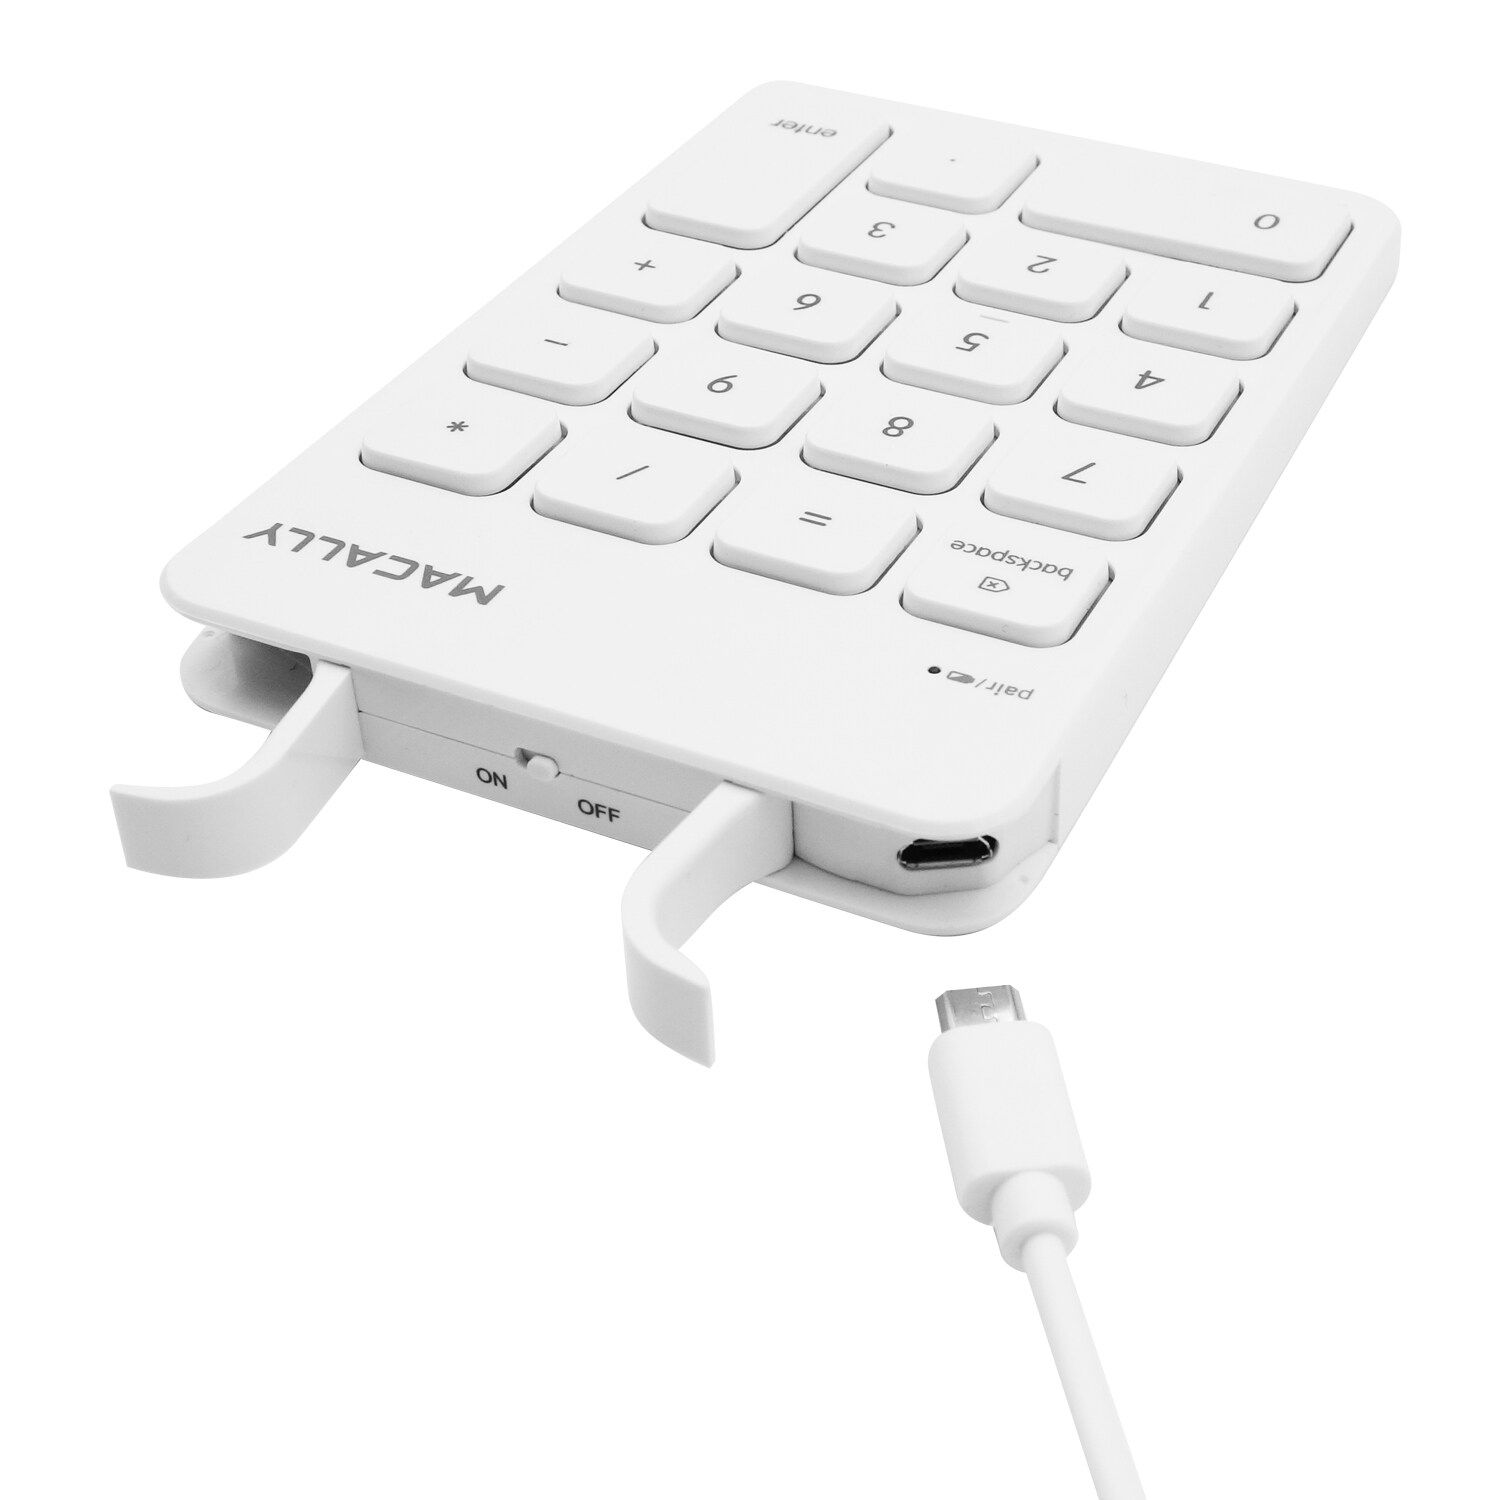 does apple have a wireless keyboard for mac